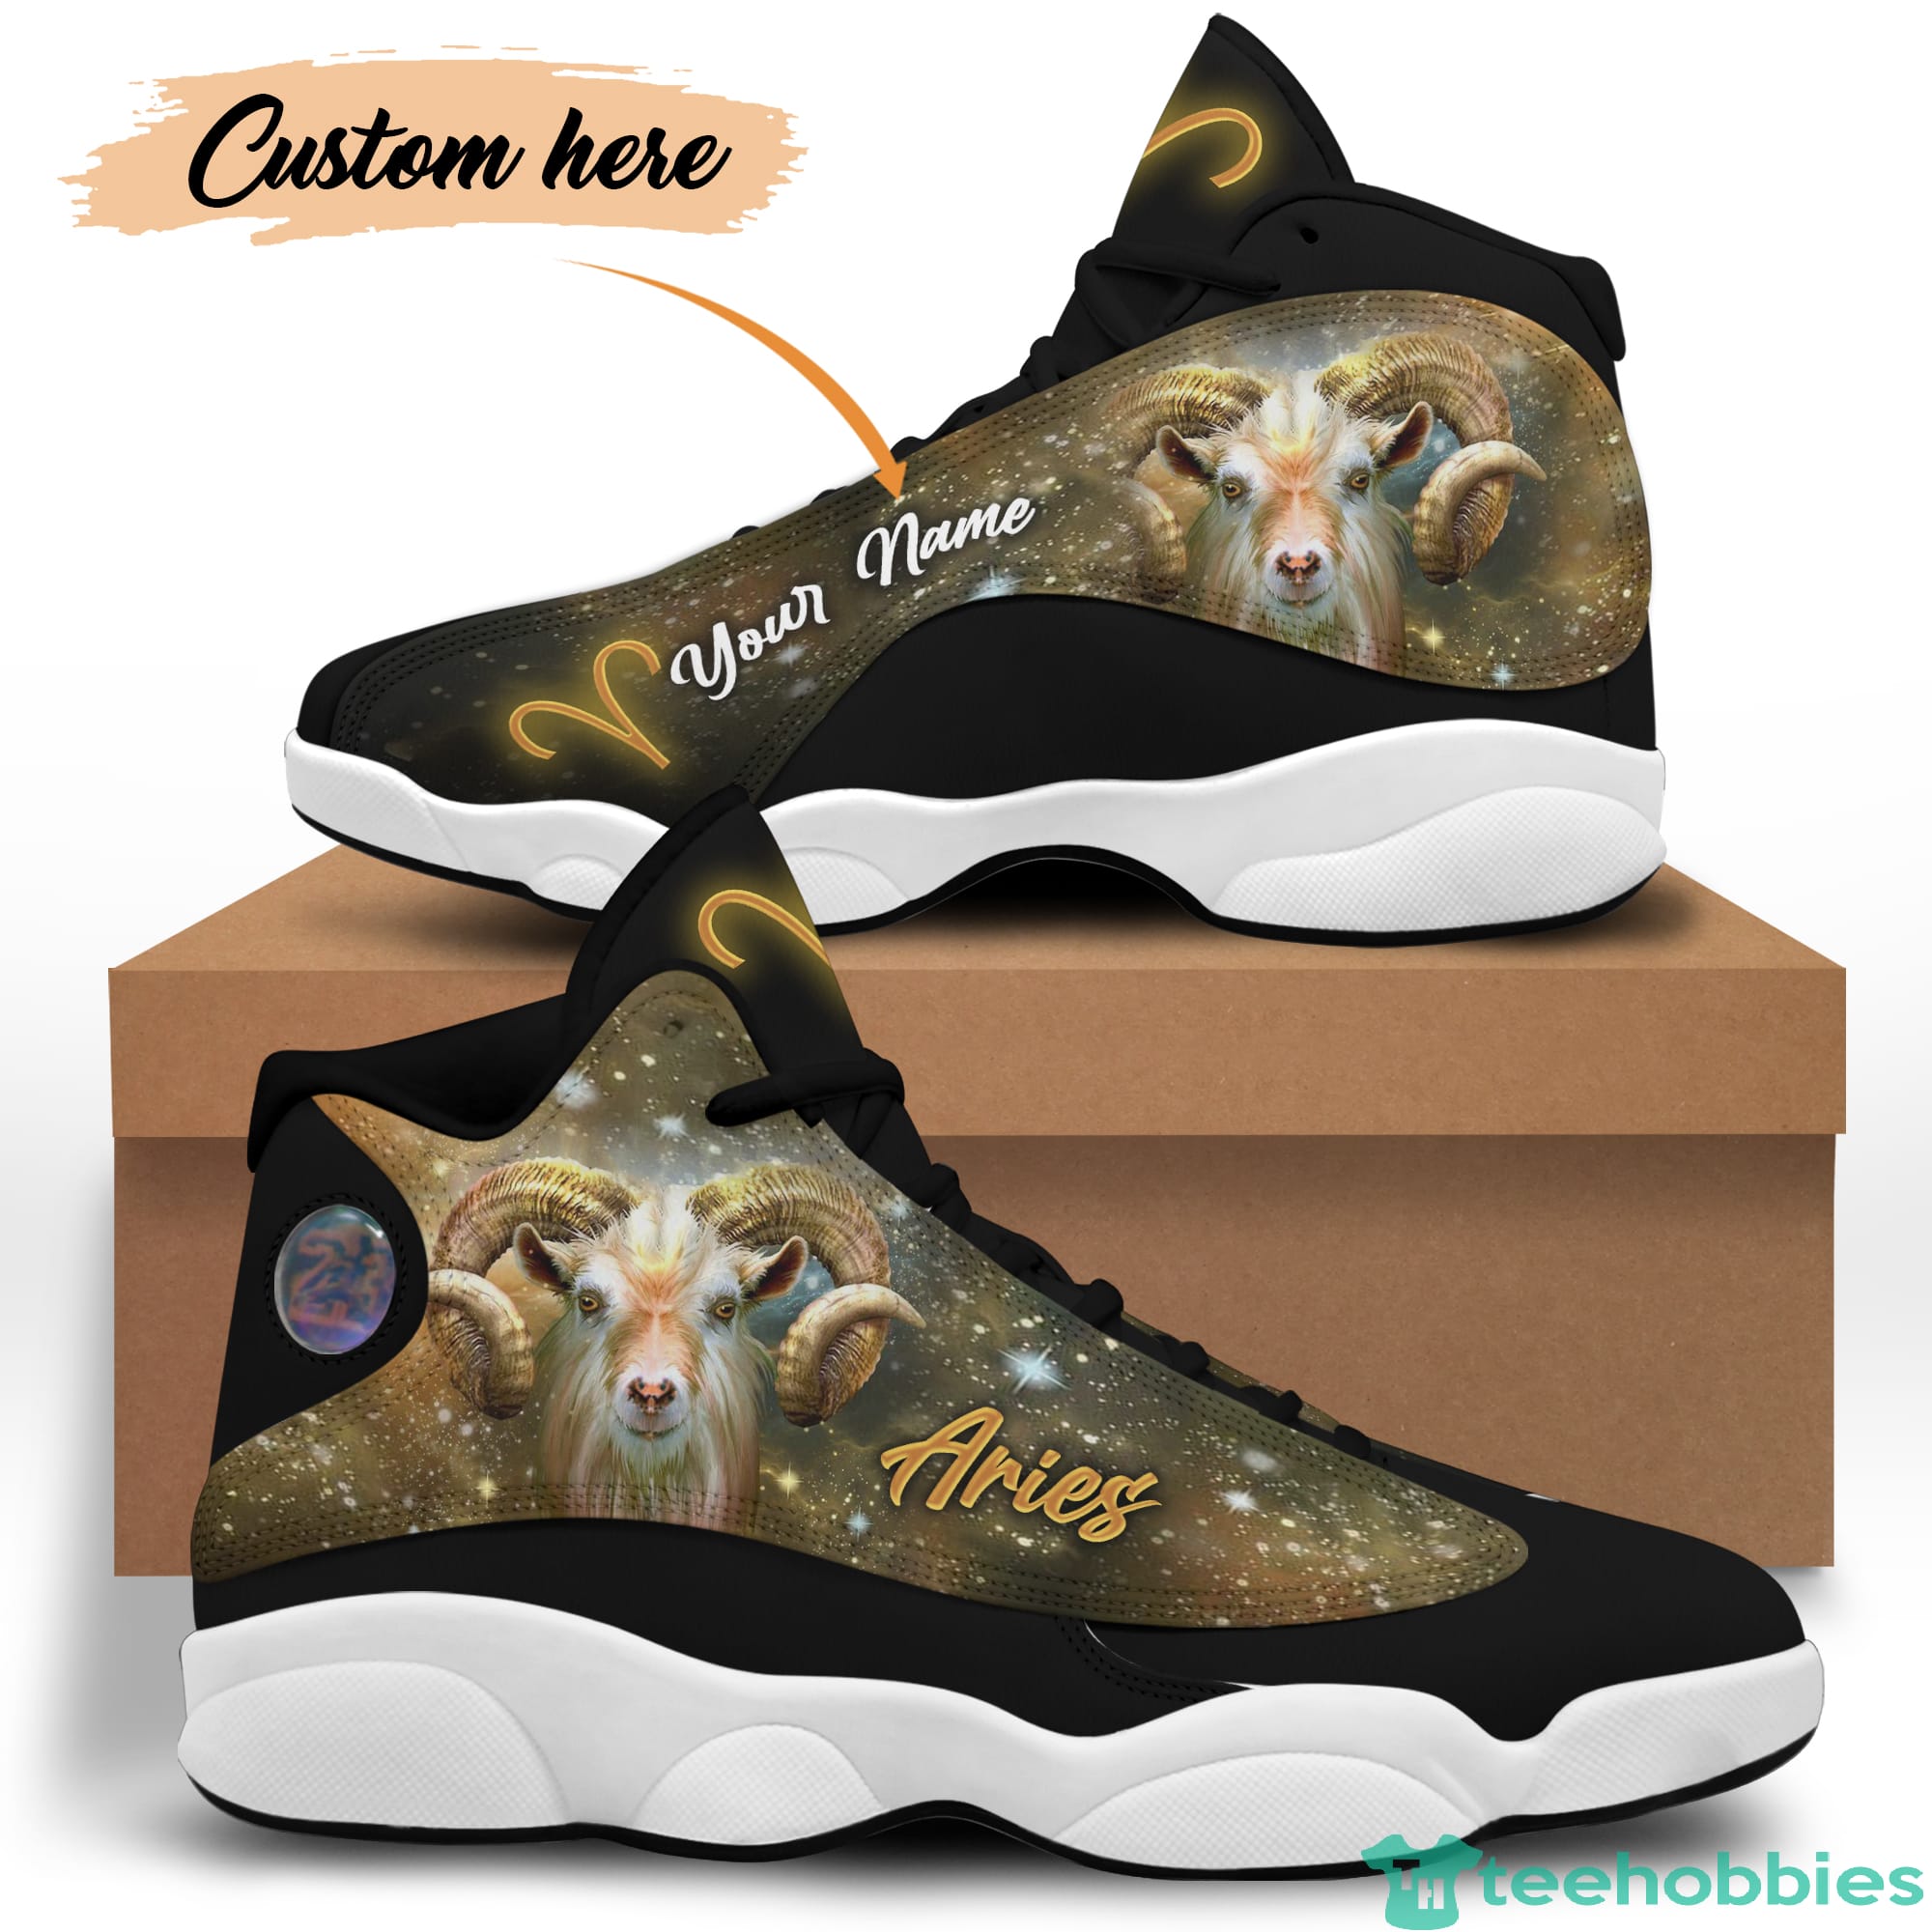 Aries Birthday Gift Personalized Name Personalized Name Air Jordan 13 Shoes SKU-205